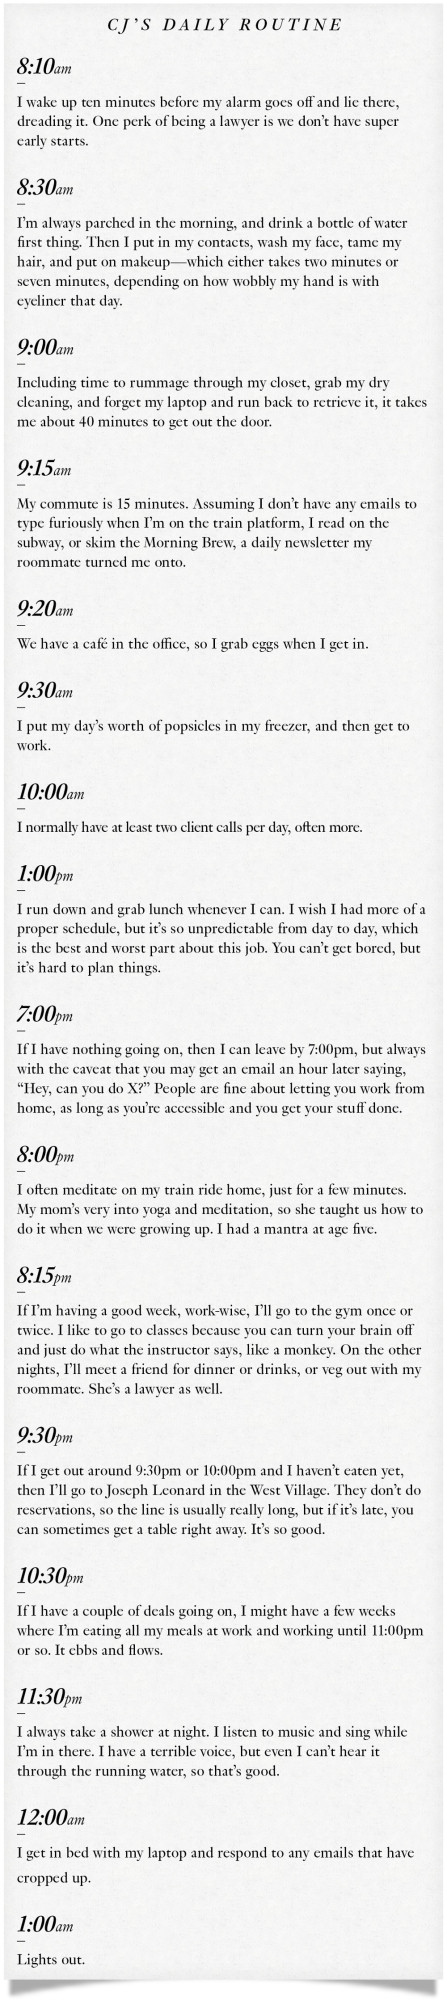 First-year lawyer routine